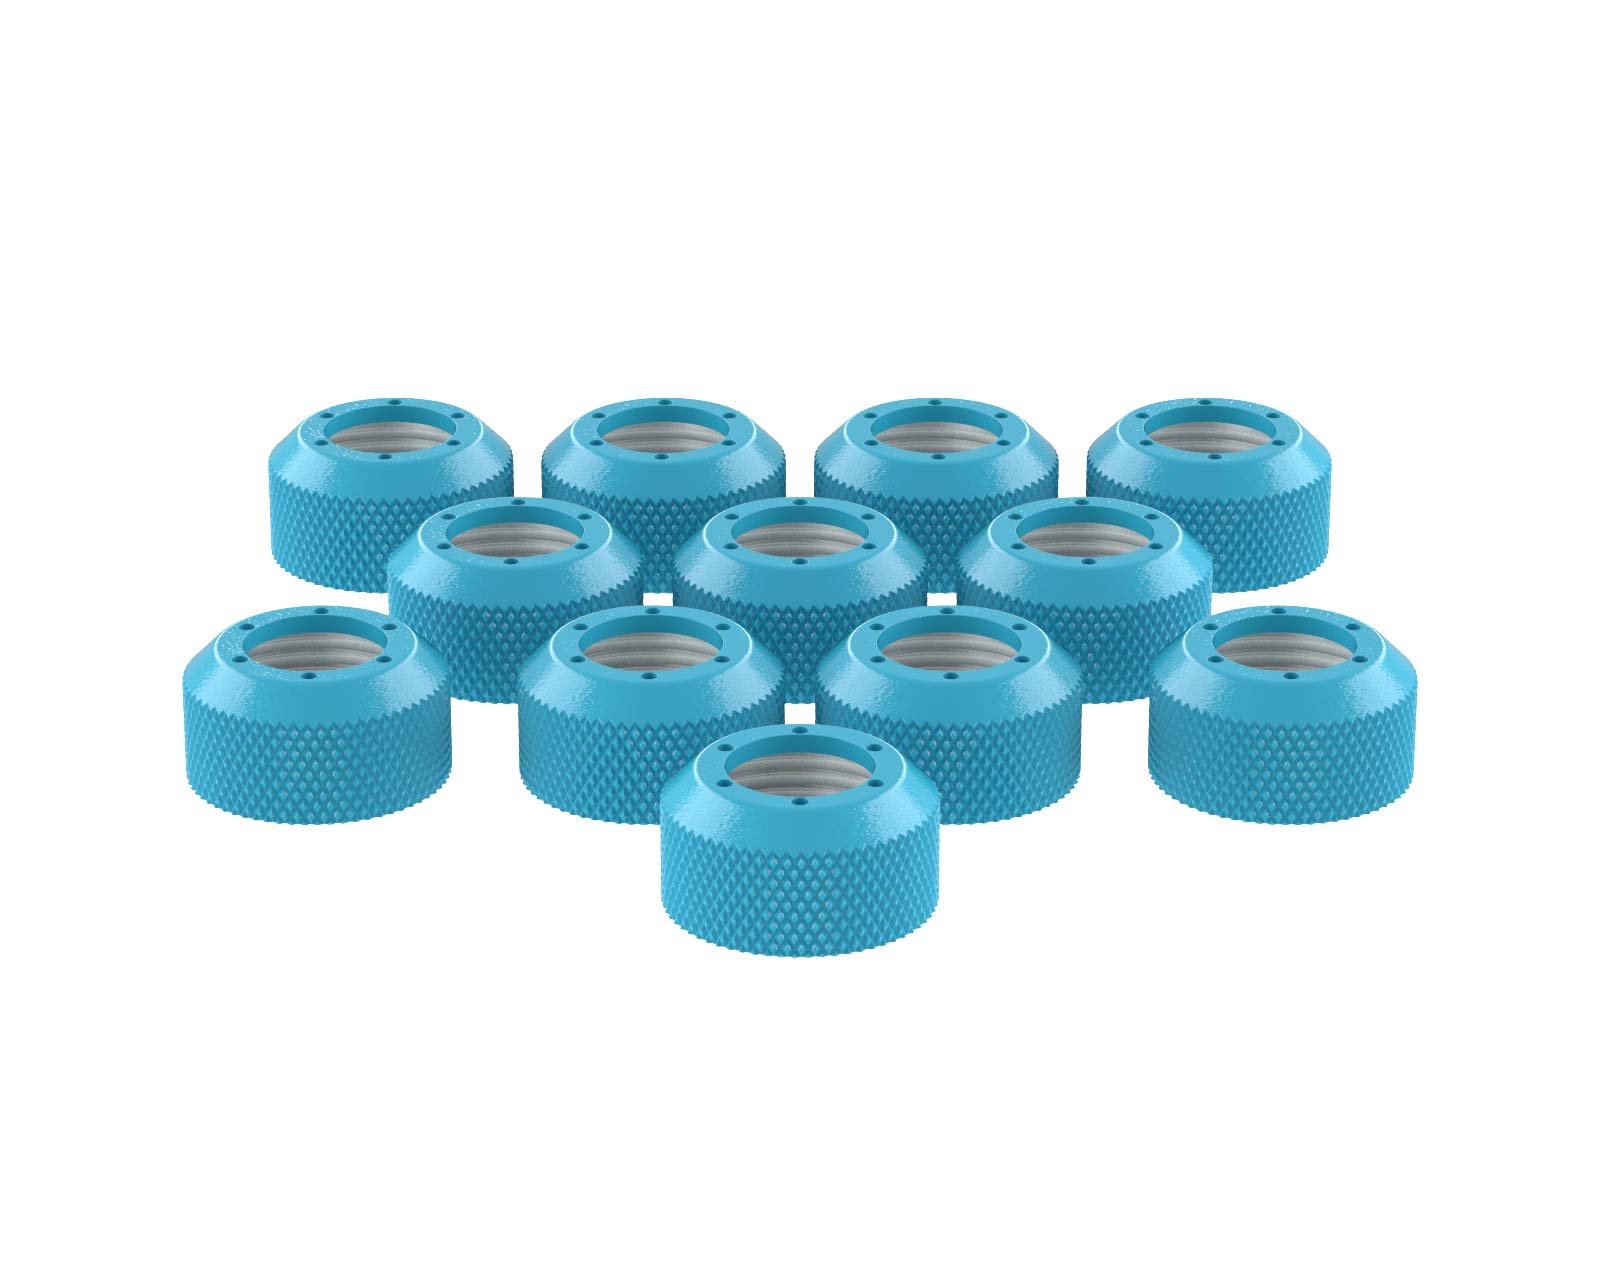 PrimoChill RSX Replacement Cap Switch Over Kit - 1/2in. - PrimoChill - KEEPING IT COOL Sky Blue